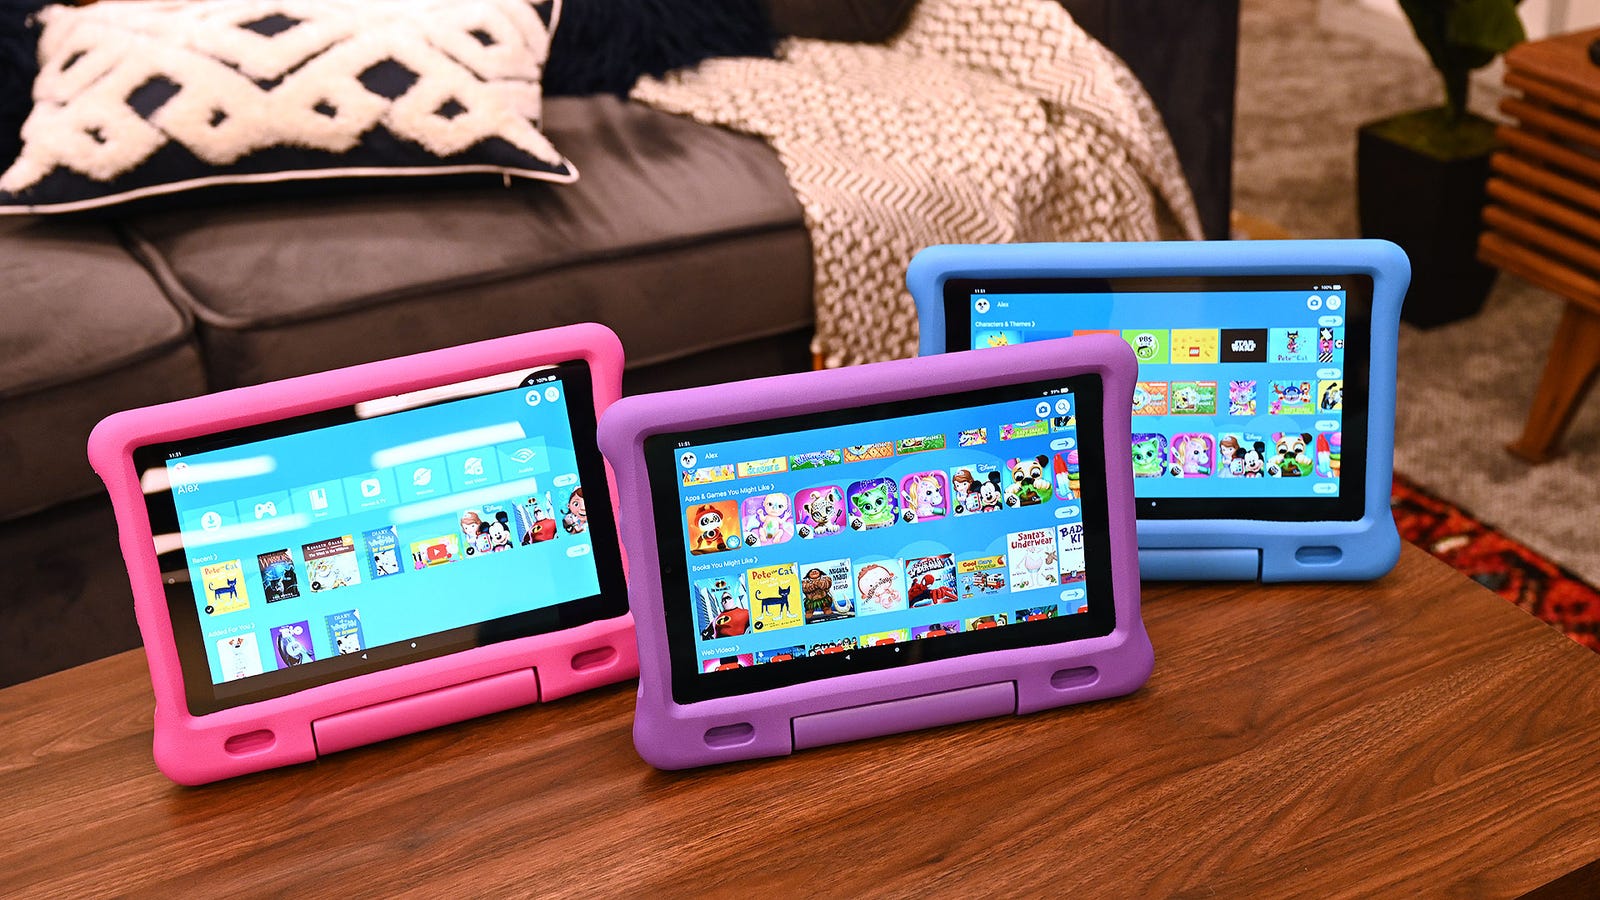 amazon fire hd kids probyford theverge